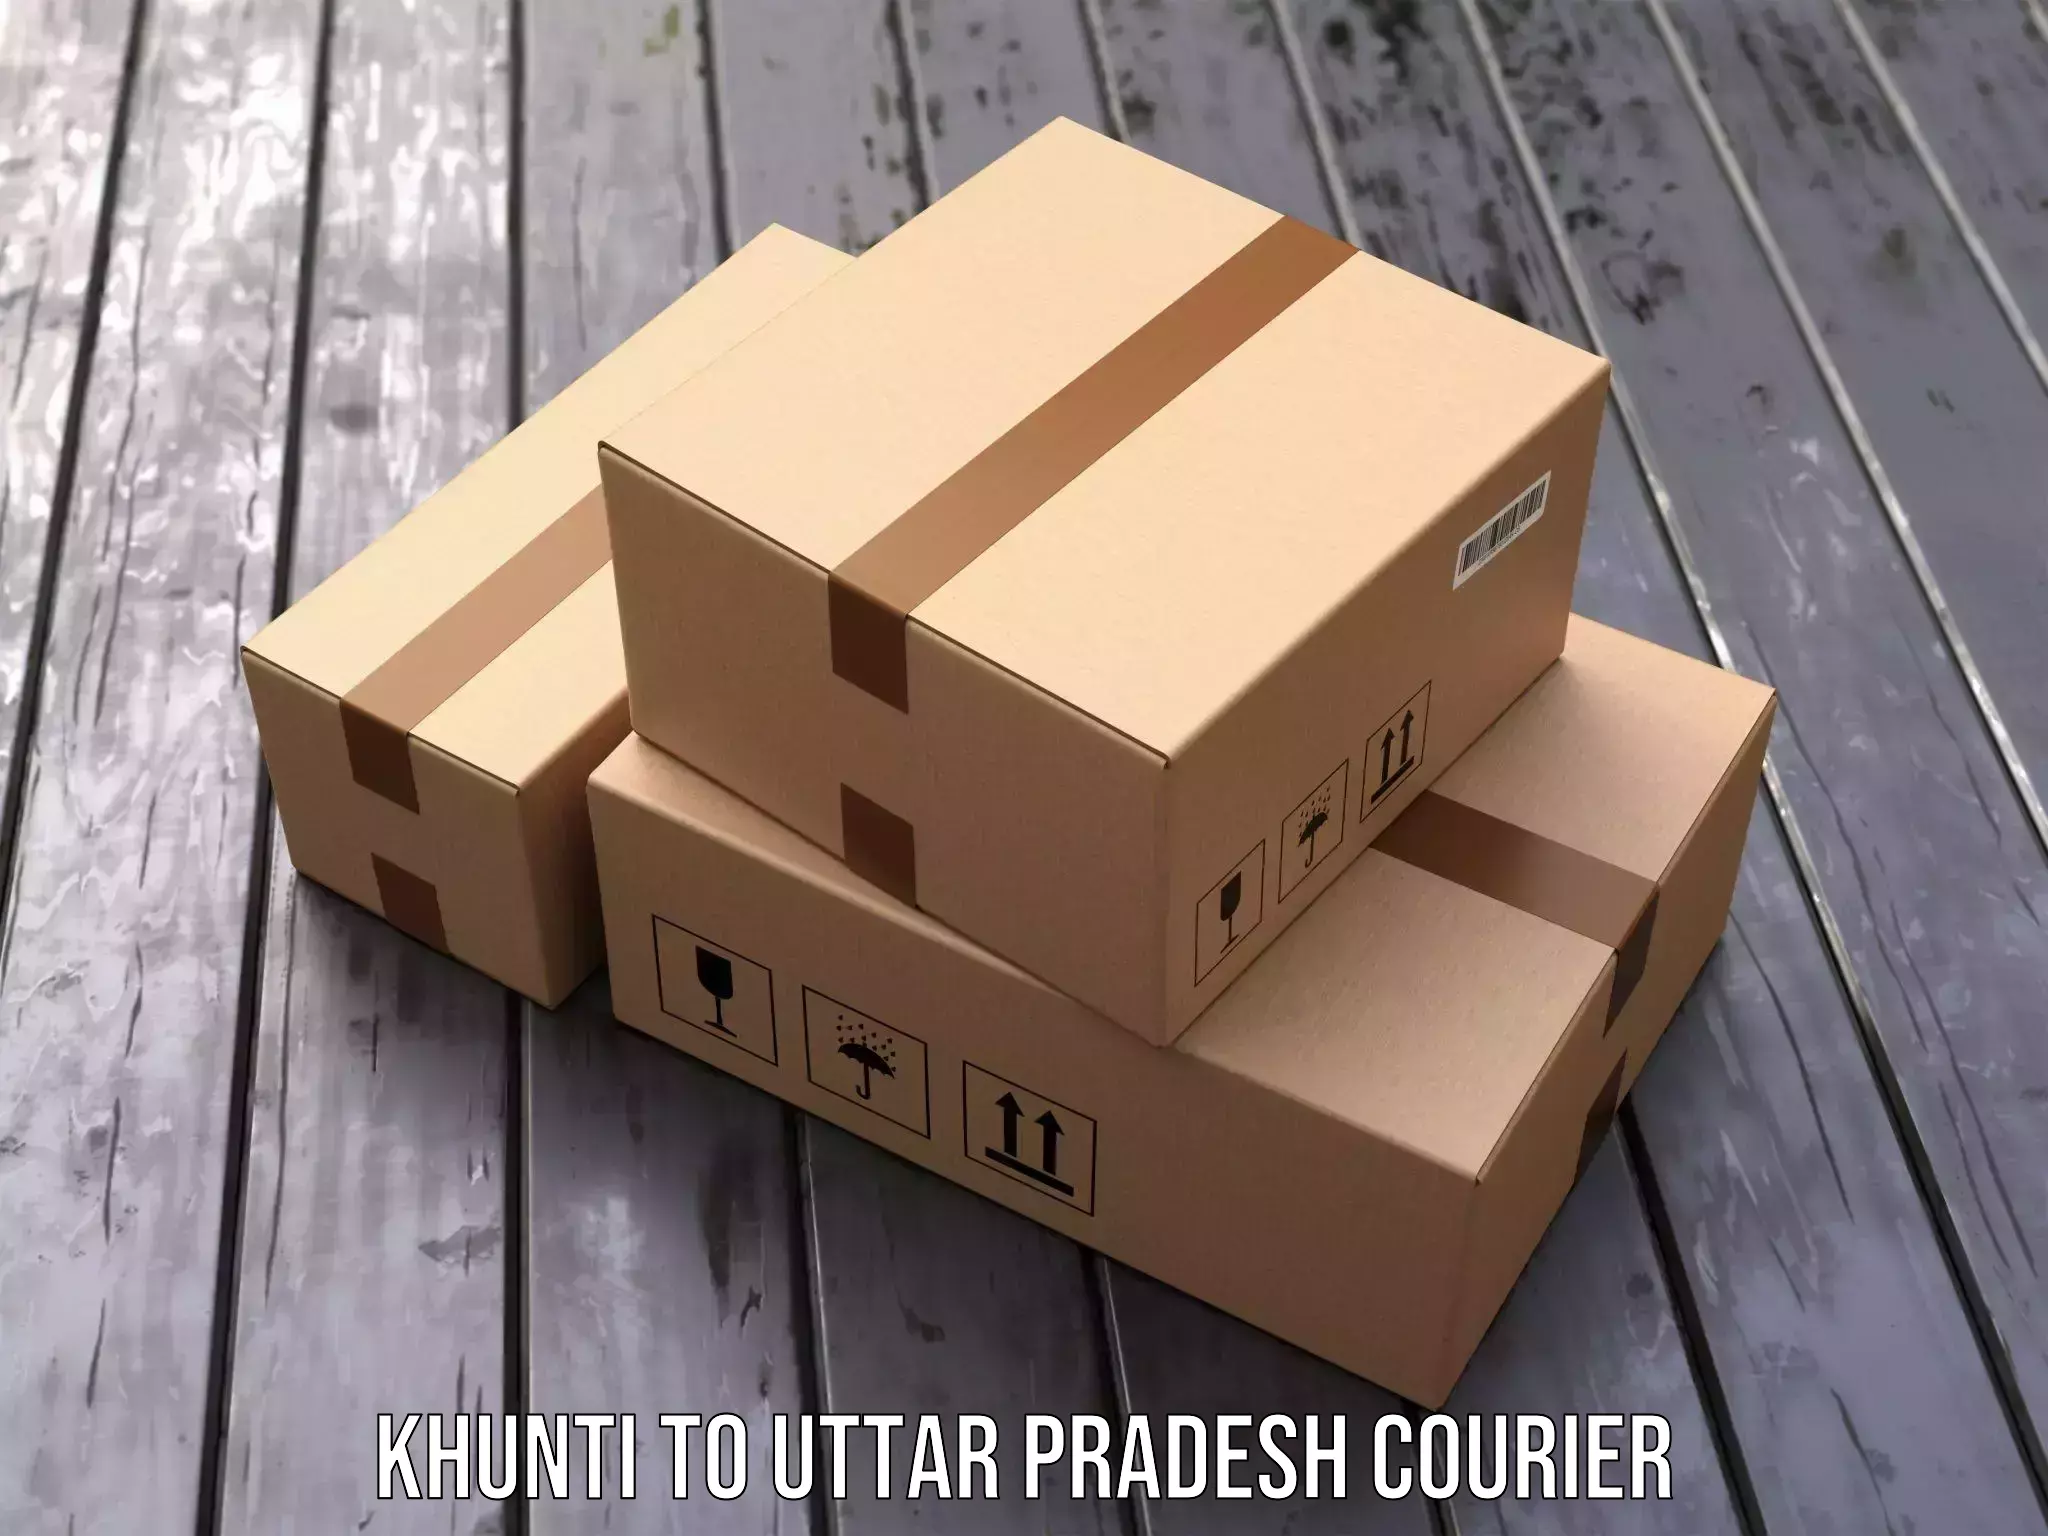 Cash on delivery service Khunti to Rasra